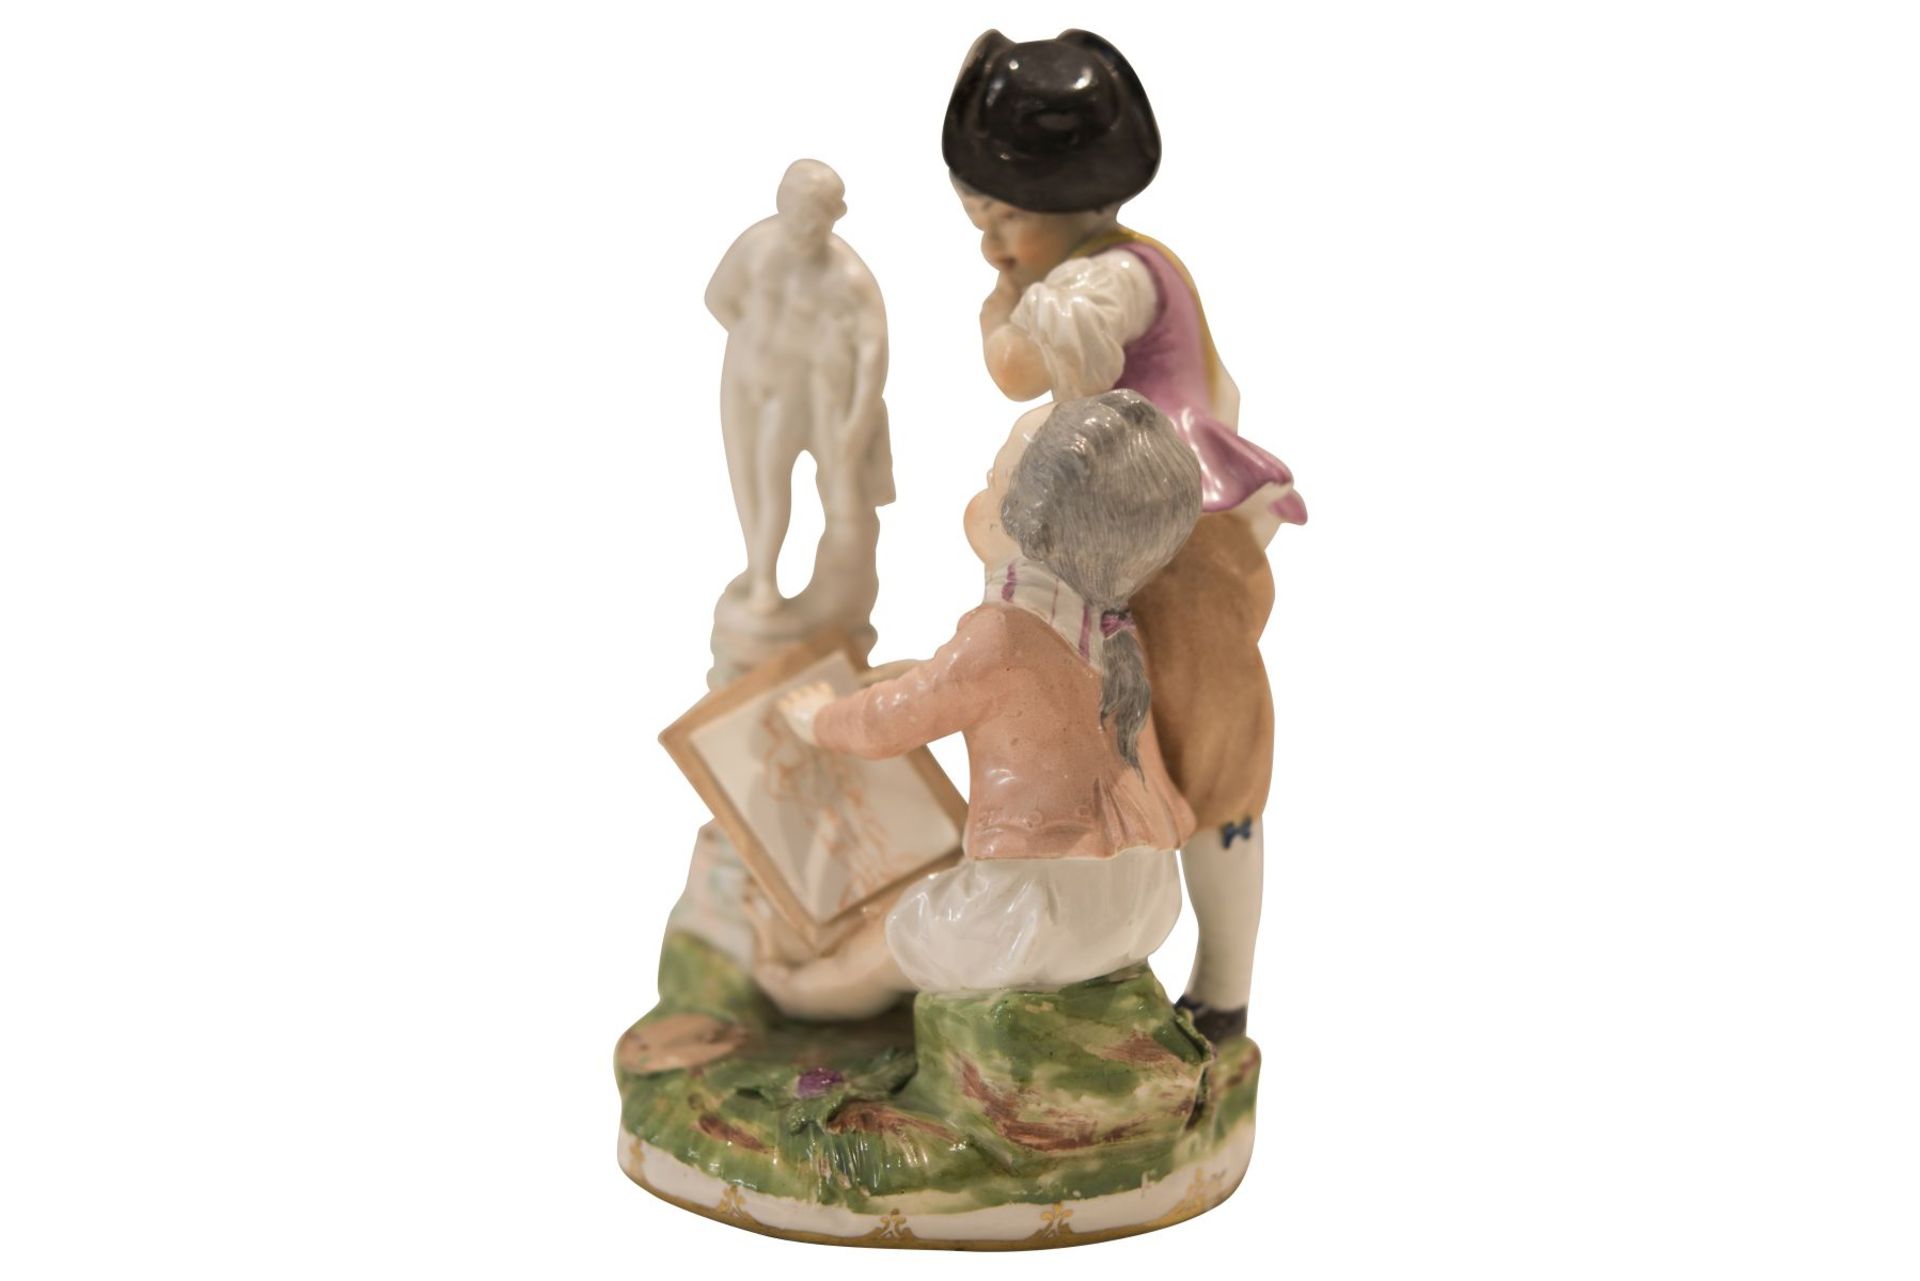 Figures group "Painters" Viennese Porcelain Manufacture 18th century - Image 4 of 6